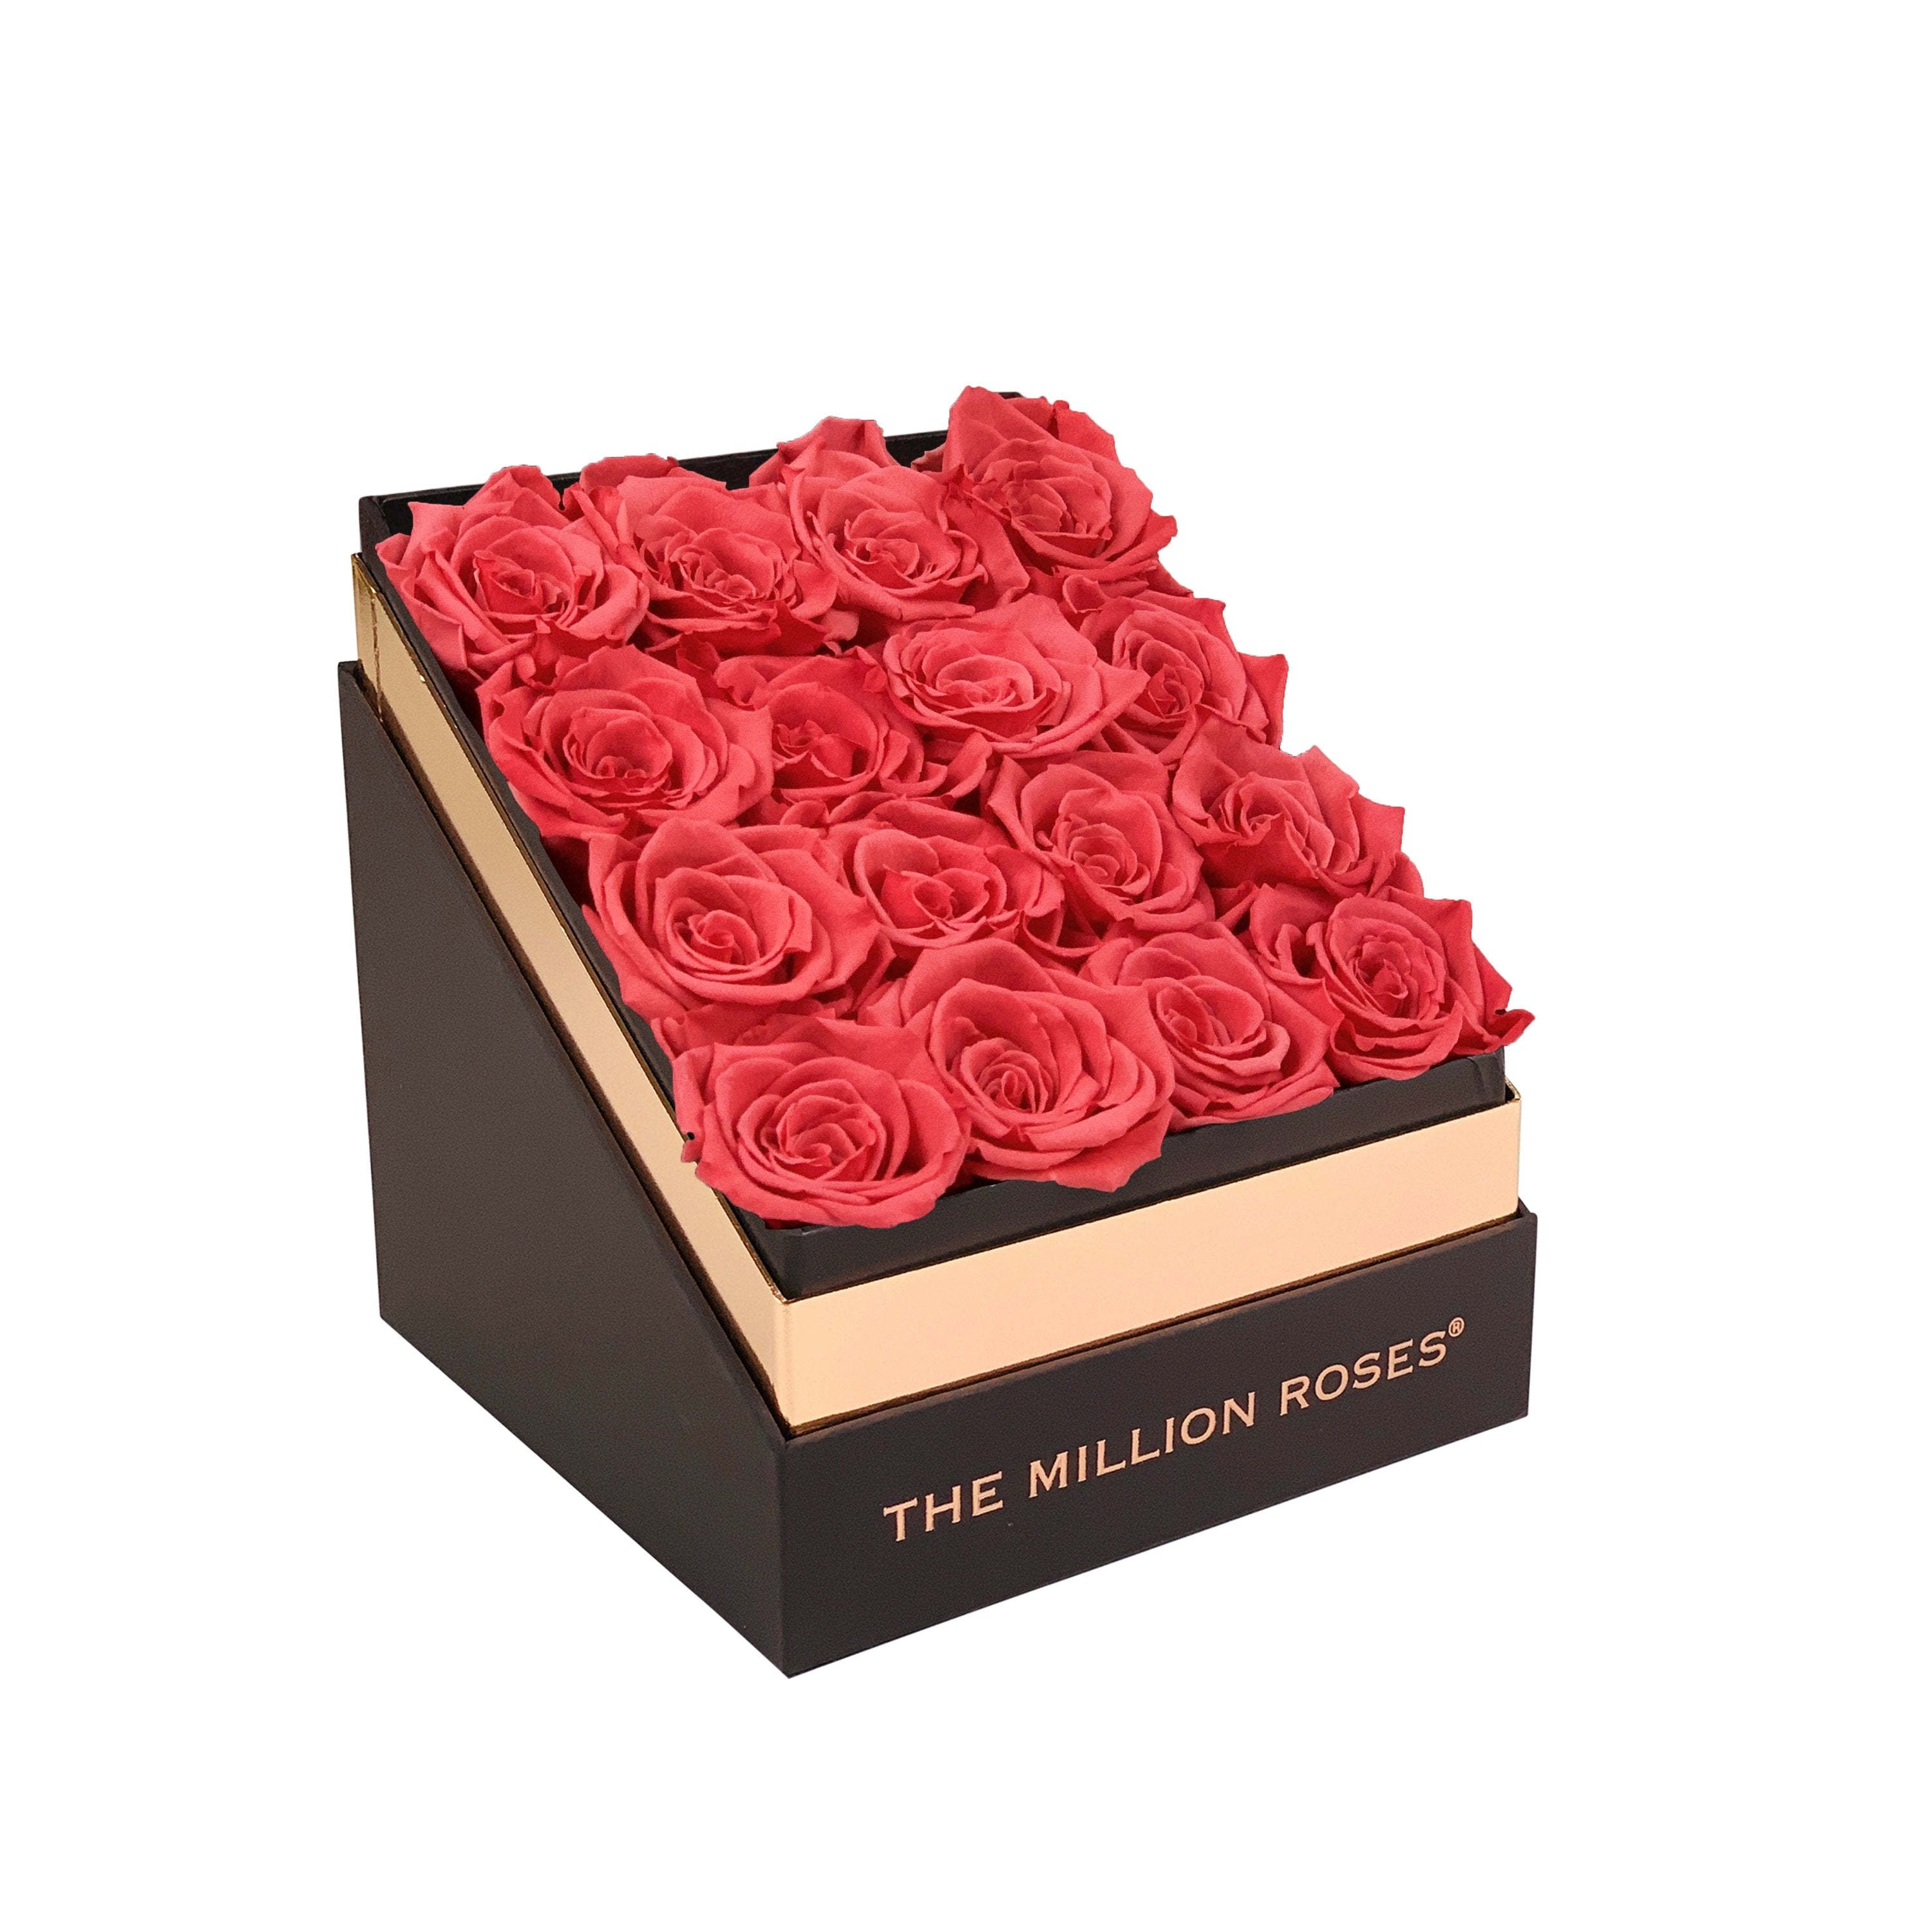 The Square - Coffee Box - Coral Roses